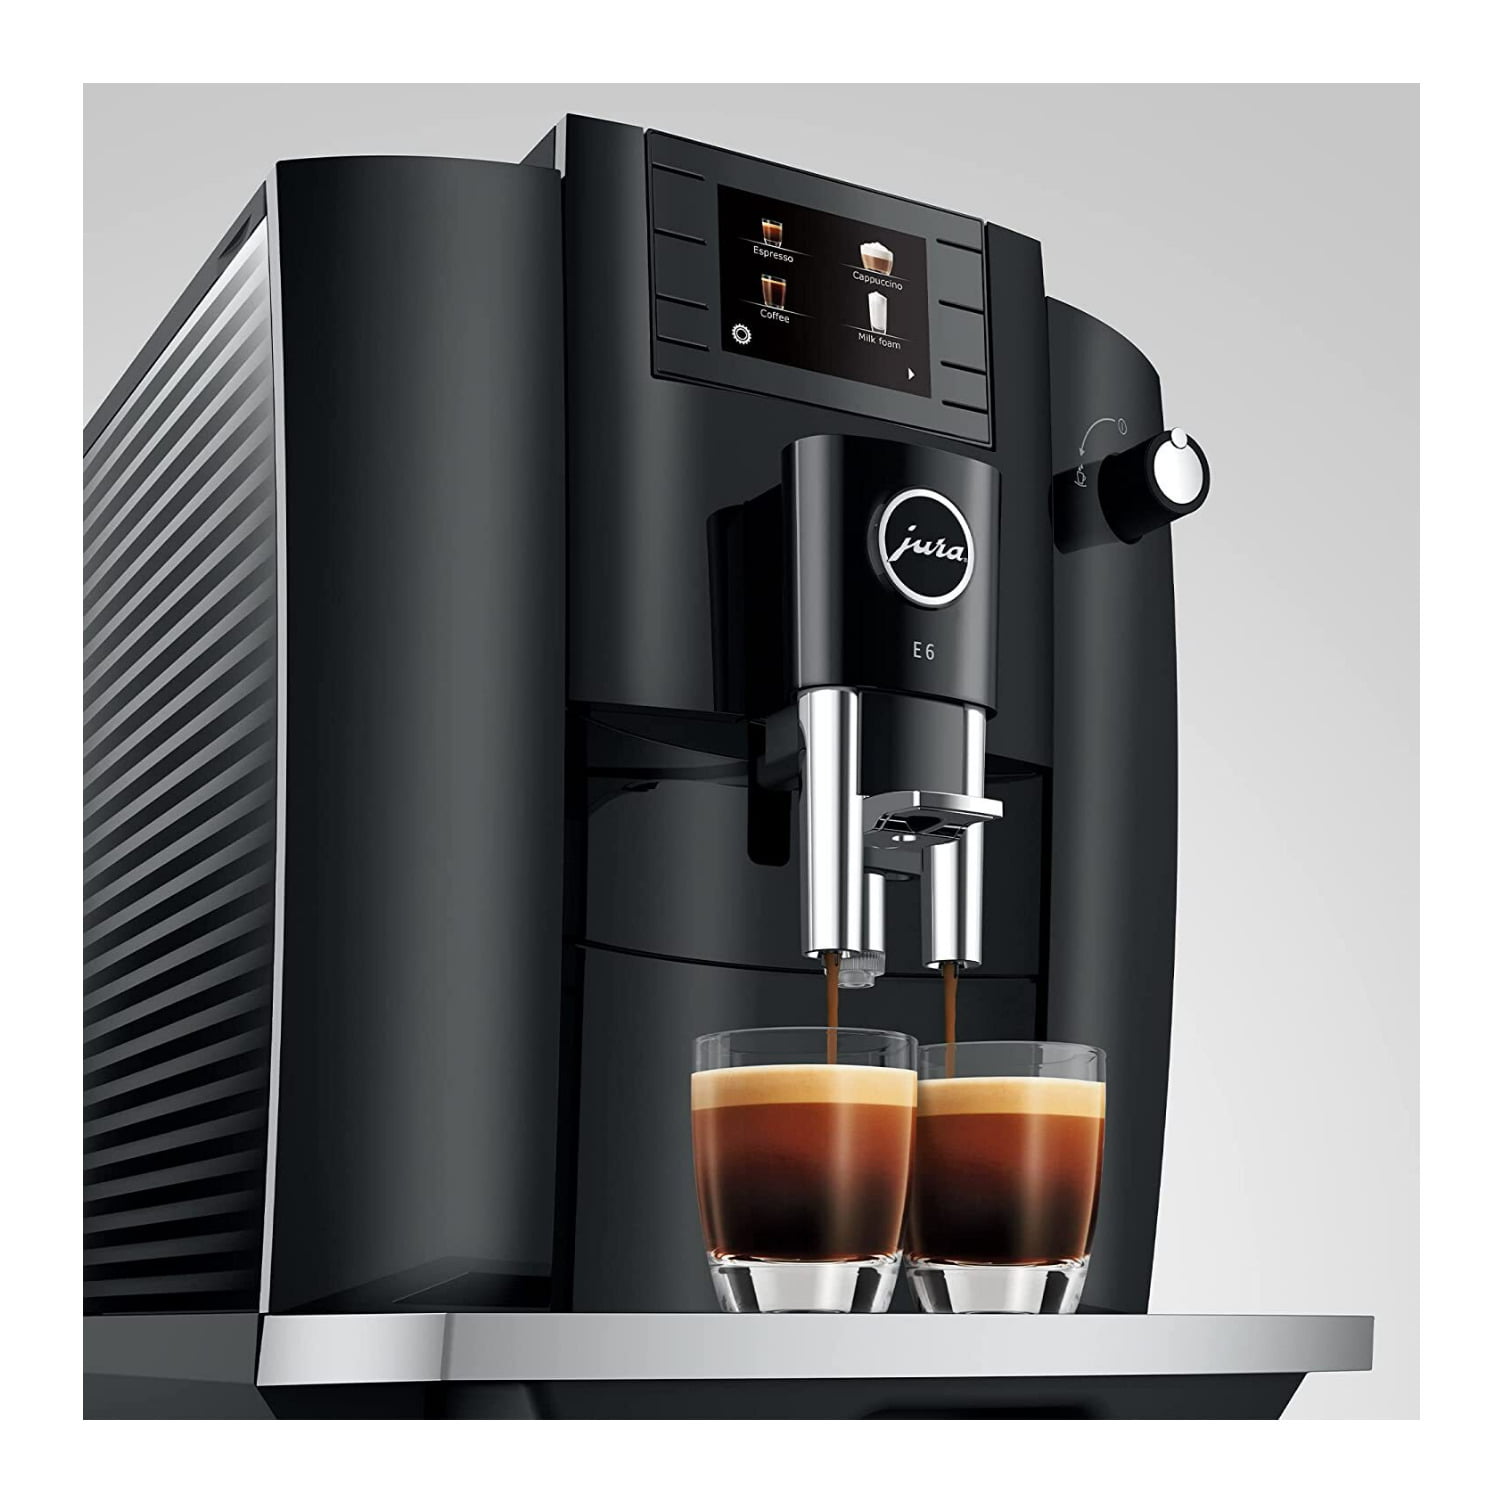 Black Coffee Machine Sale of the Year: Act Now! – Agaro